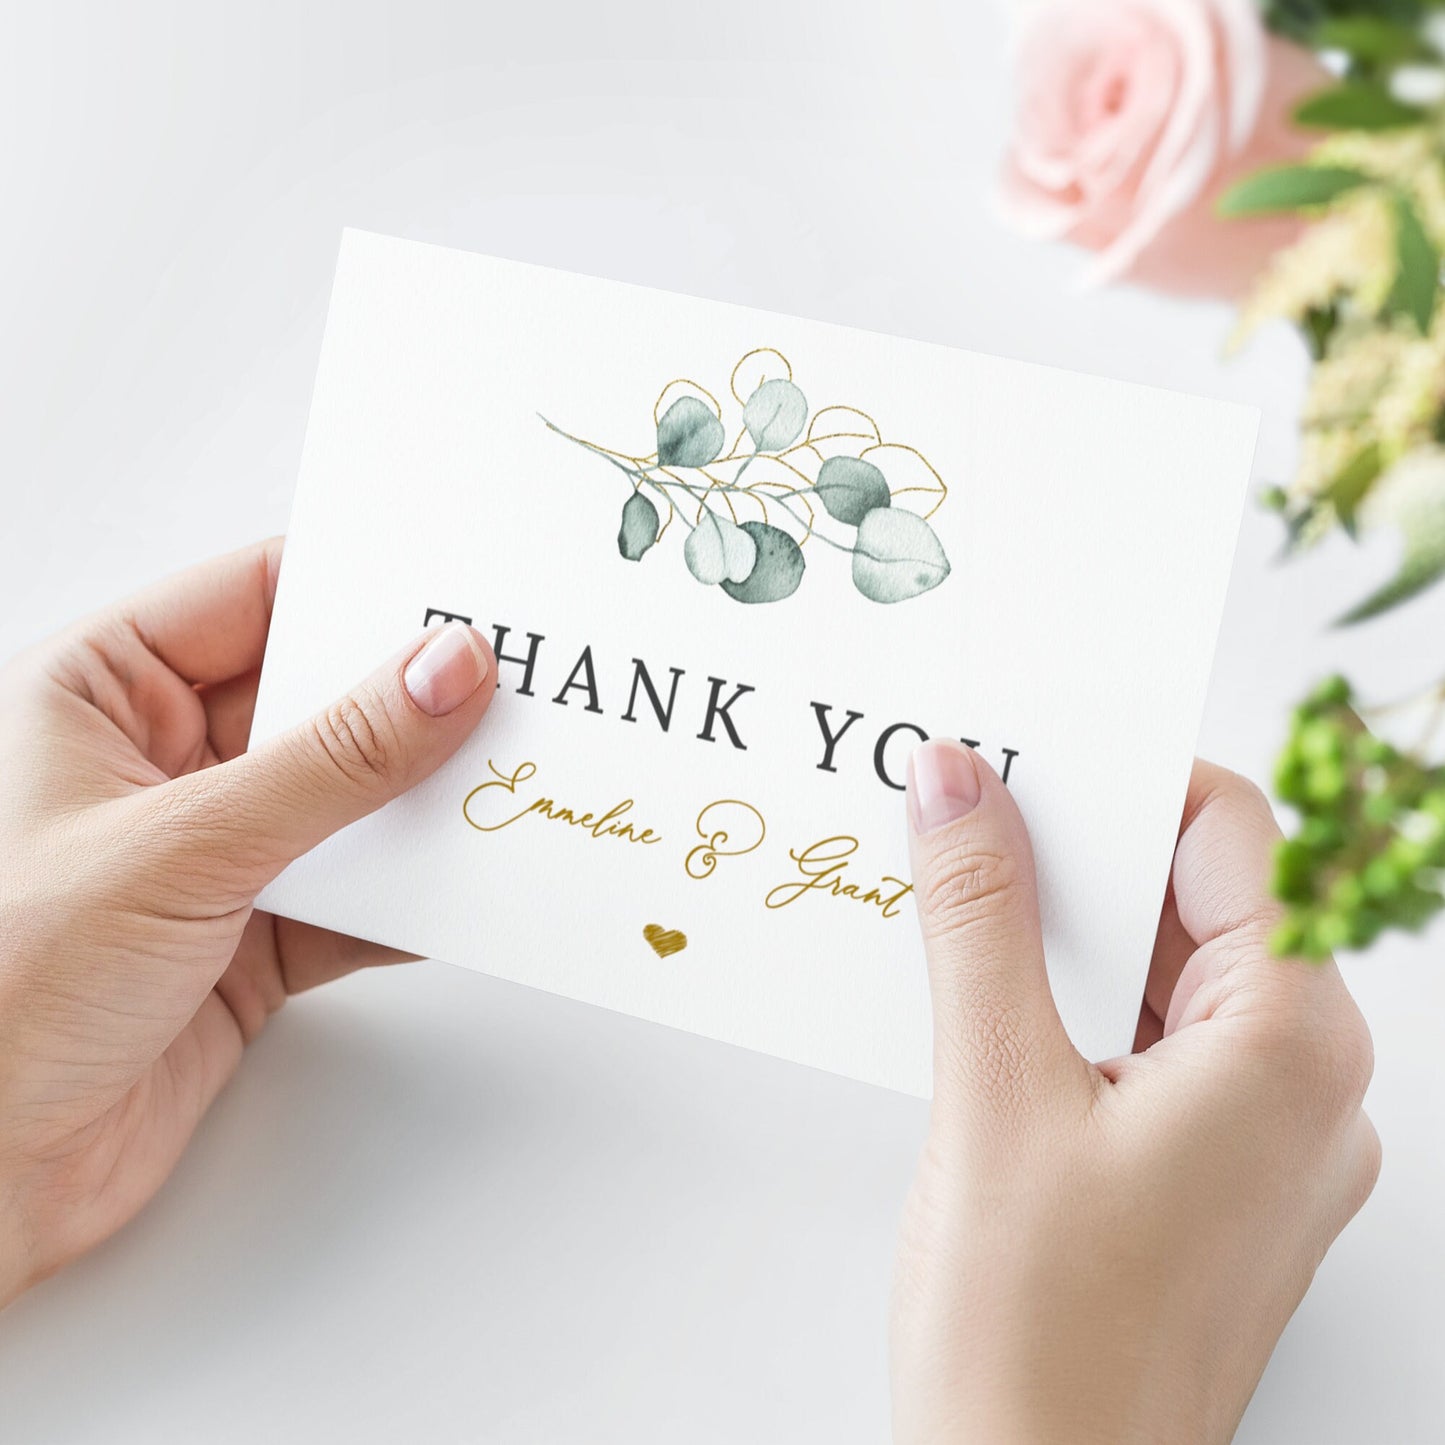 Editable  Greenery and Gold Wedding Thank You Cards Eucalyptus Cards Personalized Thank You Cards Template